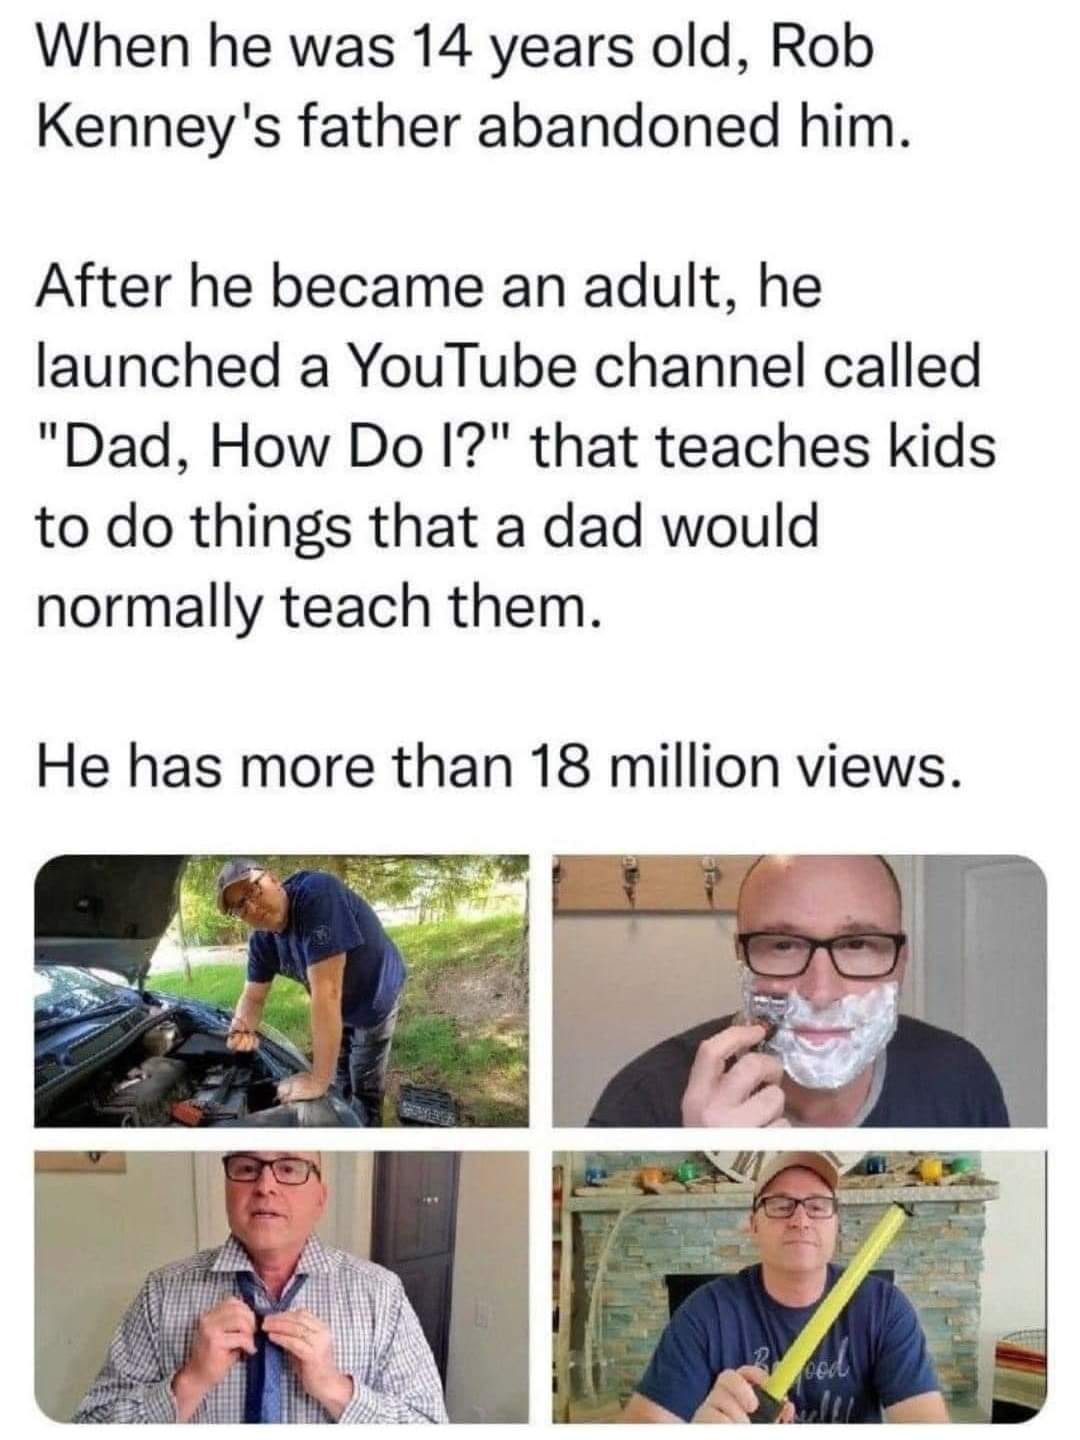 dank memes and pics - media - When he was 14 years old, Rob Kenney's father abandoned him. After he became an adult, he launched a YouTube channel called "Dad, How Do I?" that teaches kids to do things that a dad would normally teach them. He has more tha